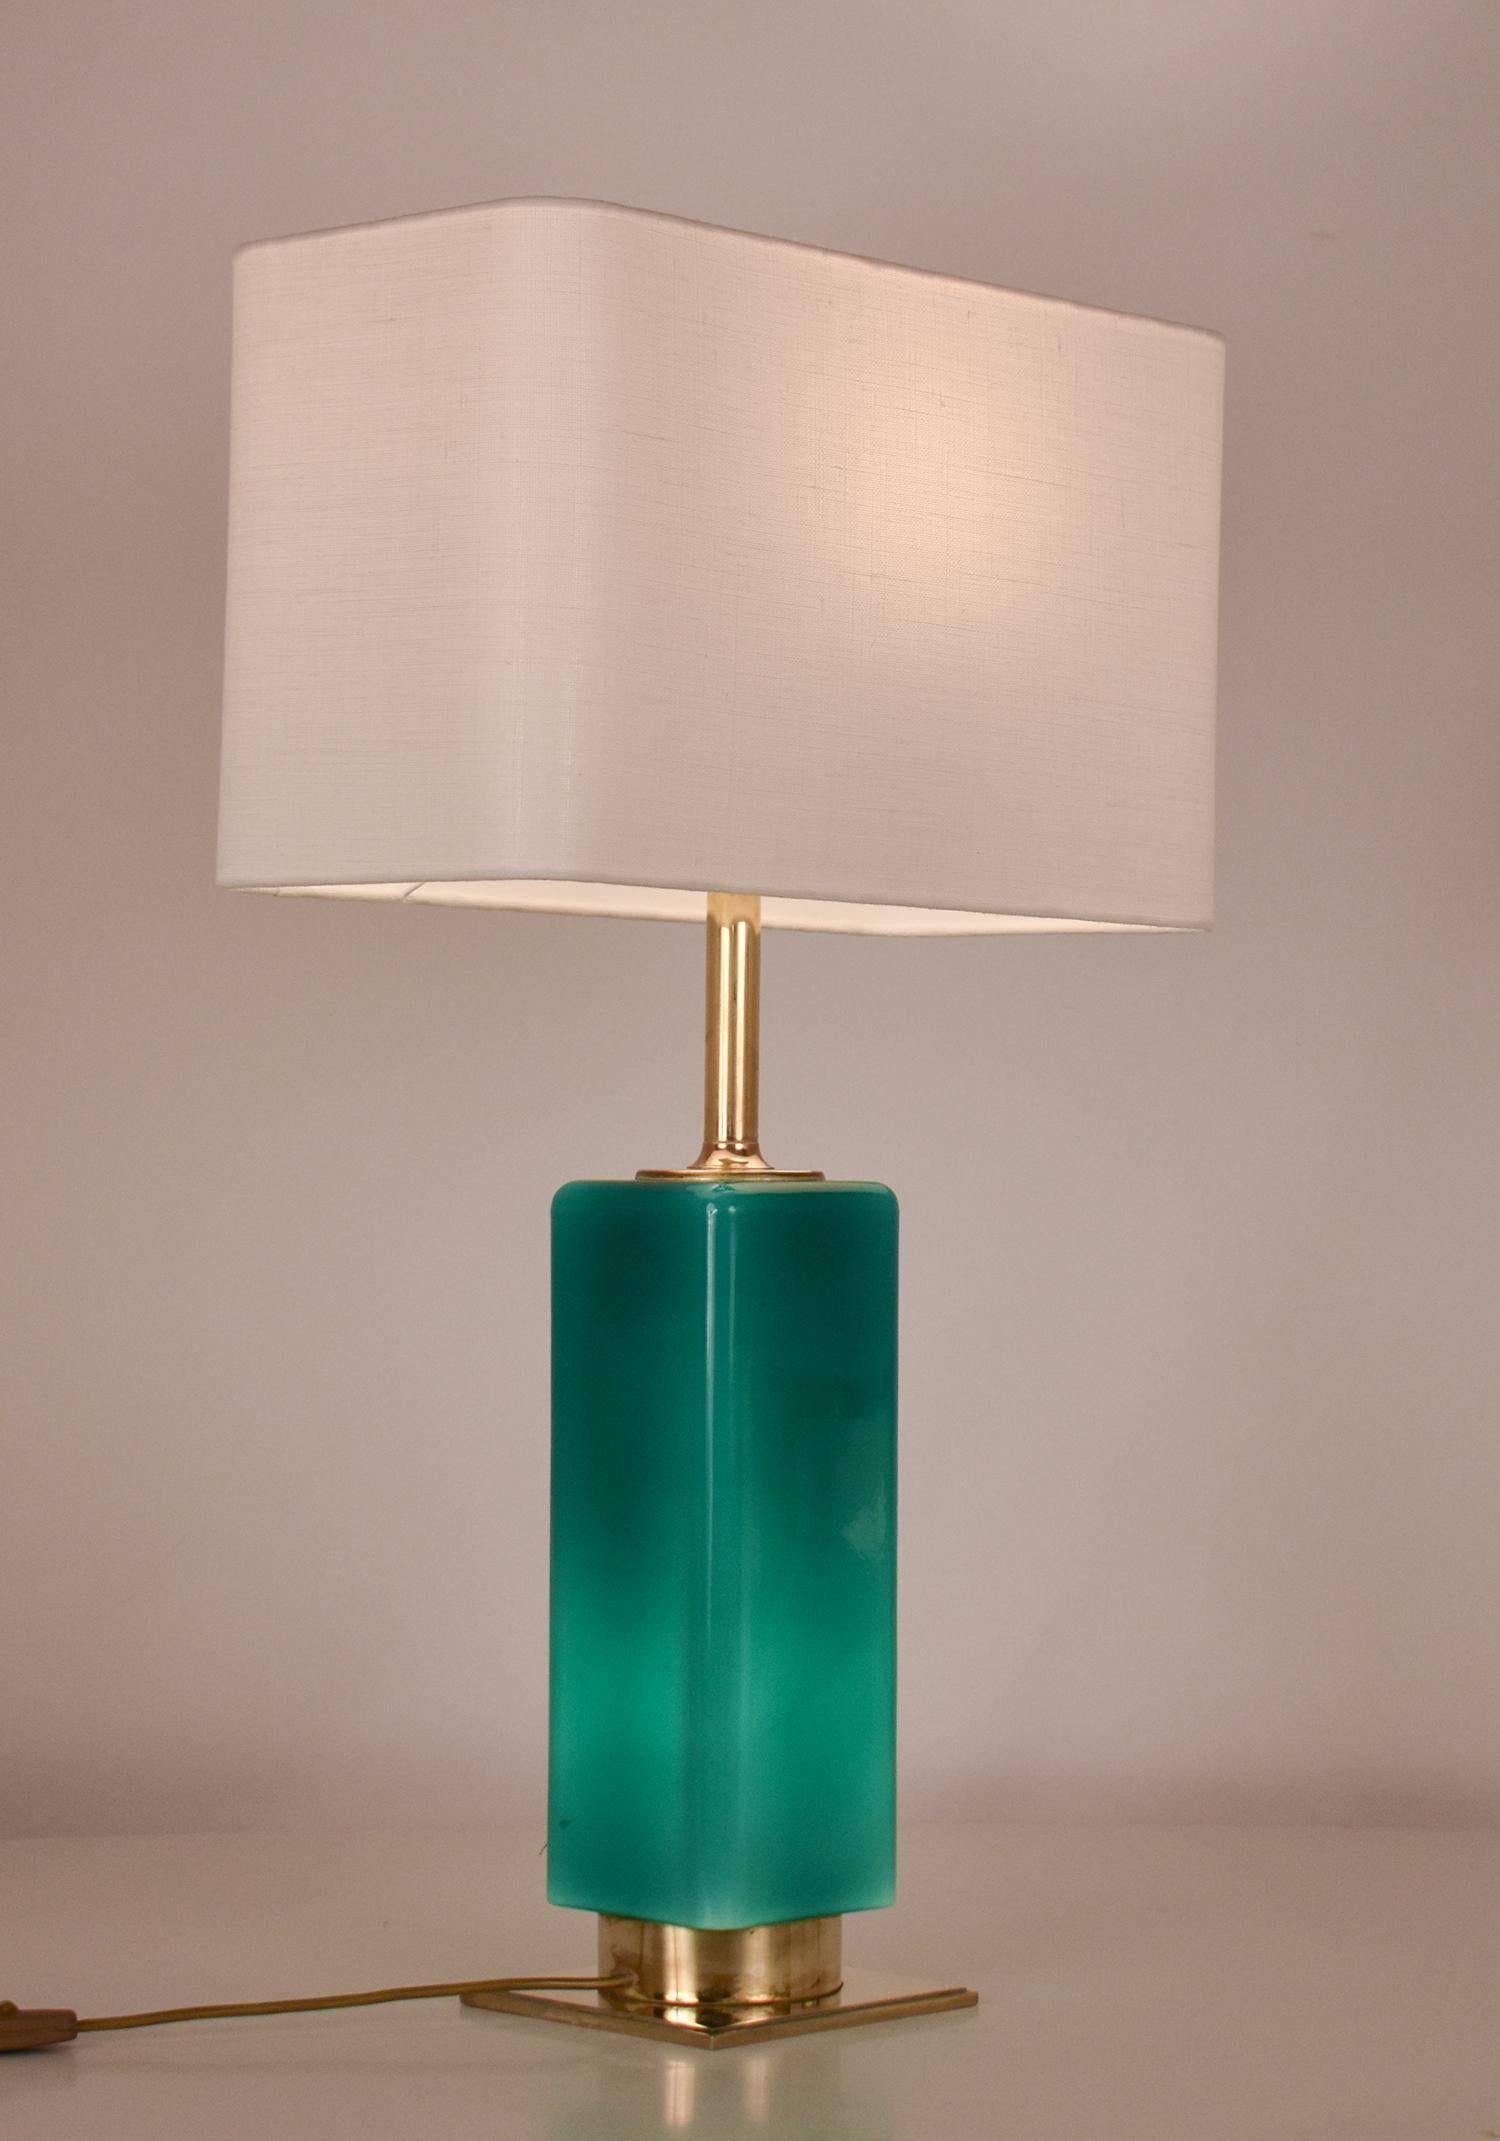 Mid- Century Large Green Glass and Brass Table Lamp Metalarte, Spain, 1970's In Good Condition For Sale In Barcelona, Cataluna